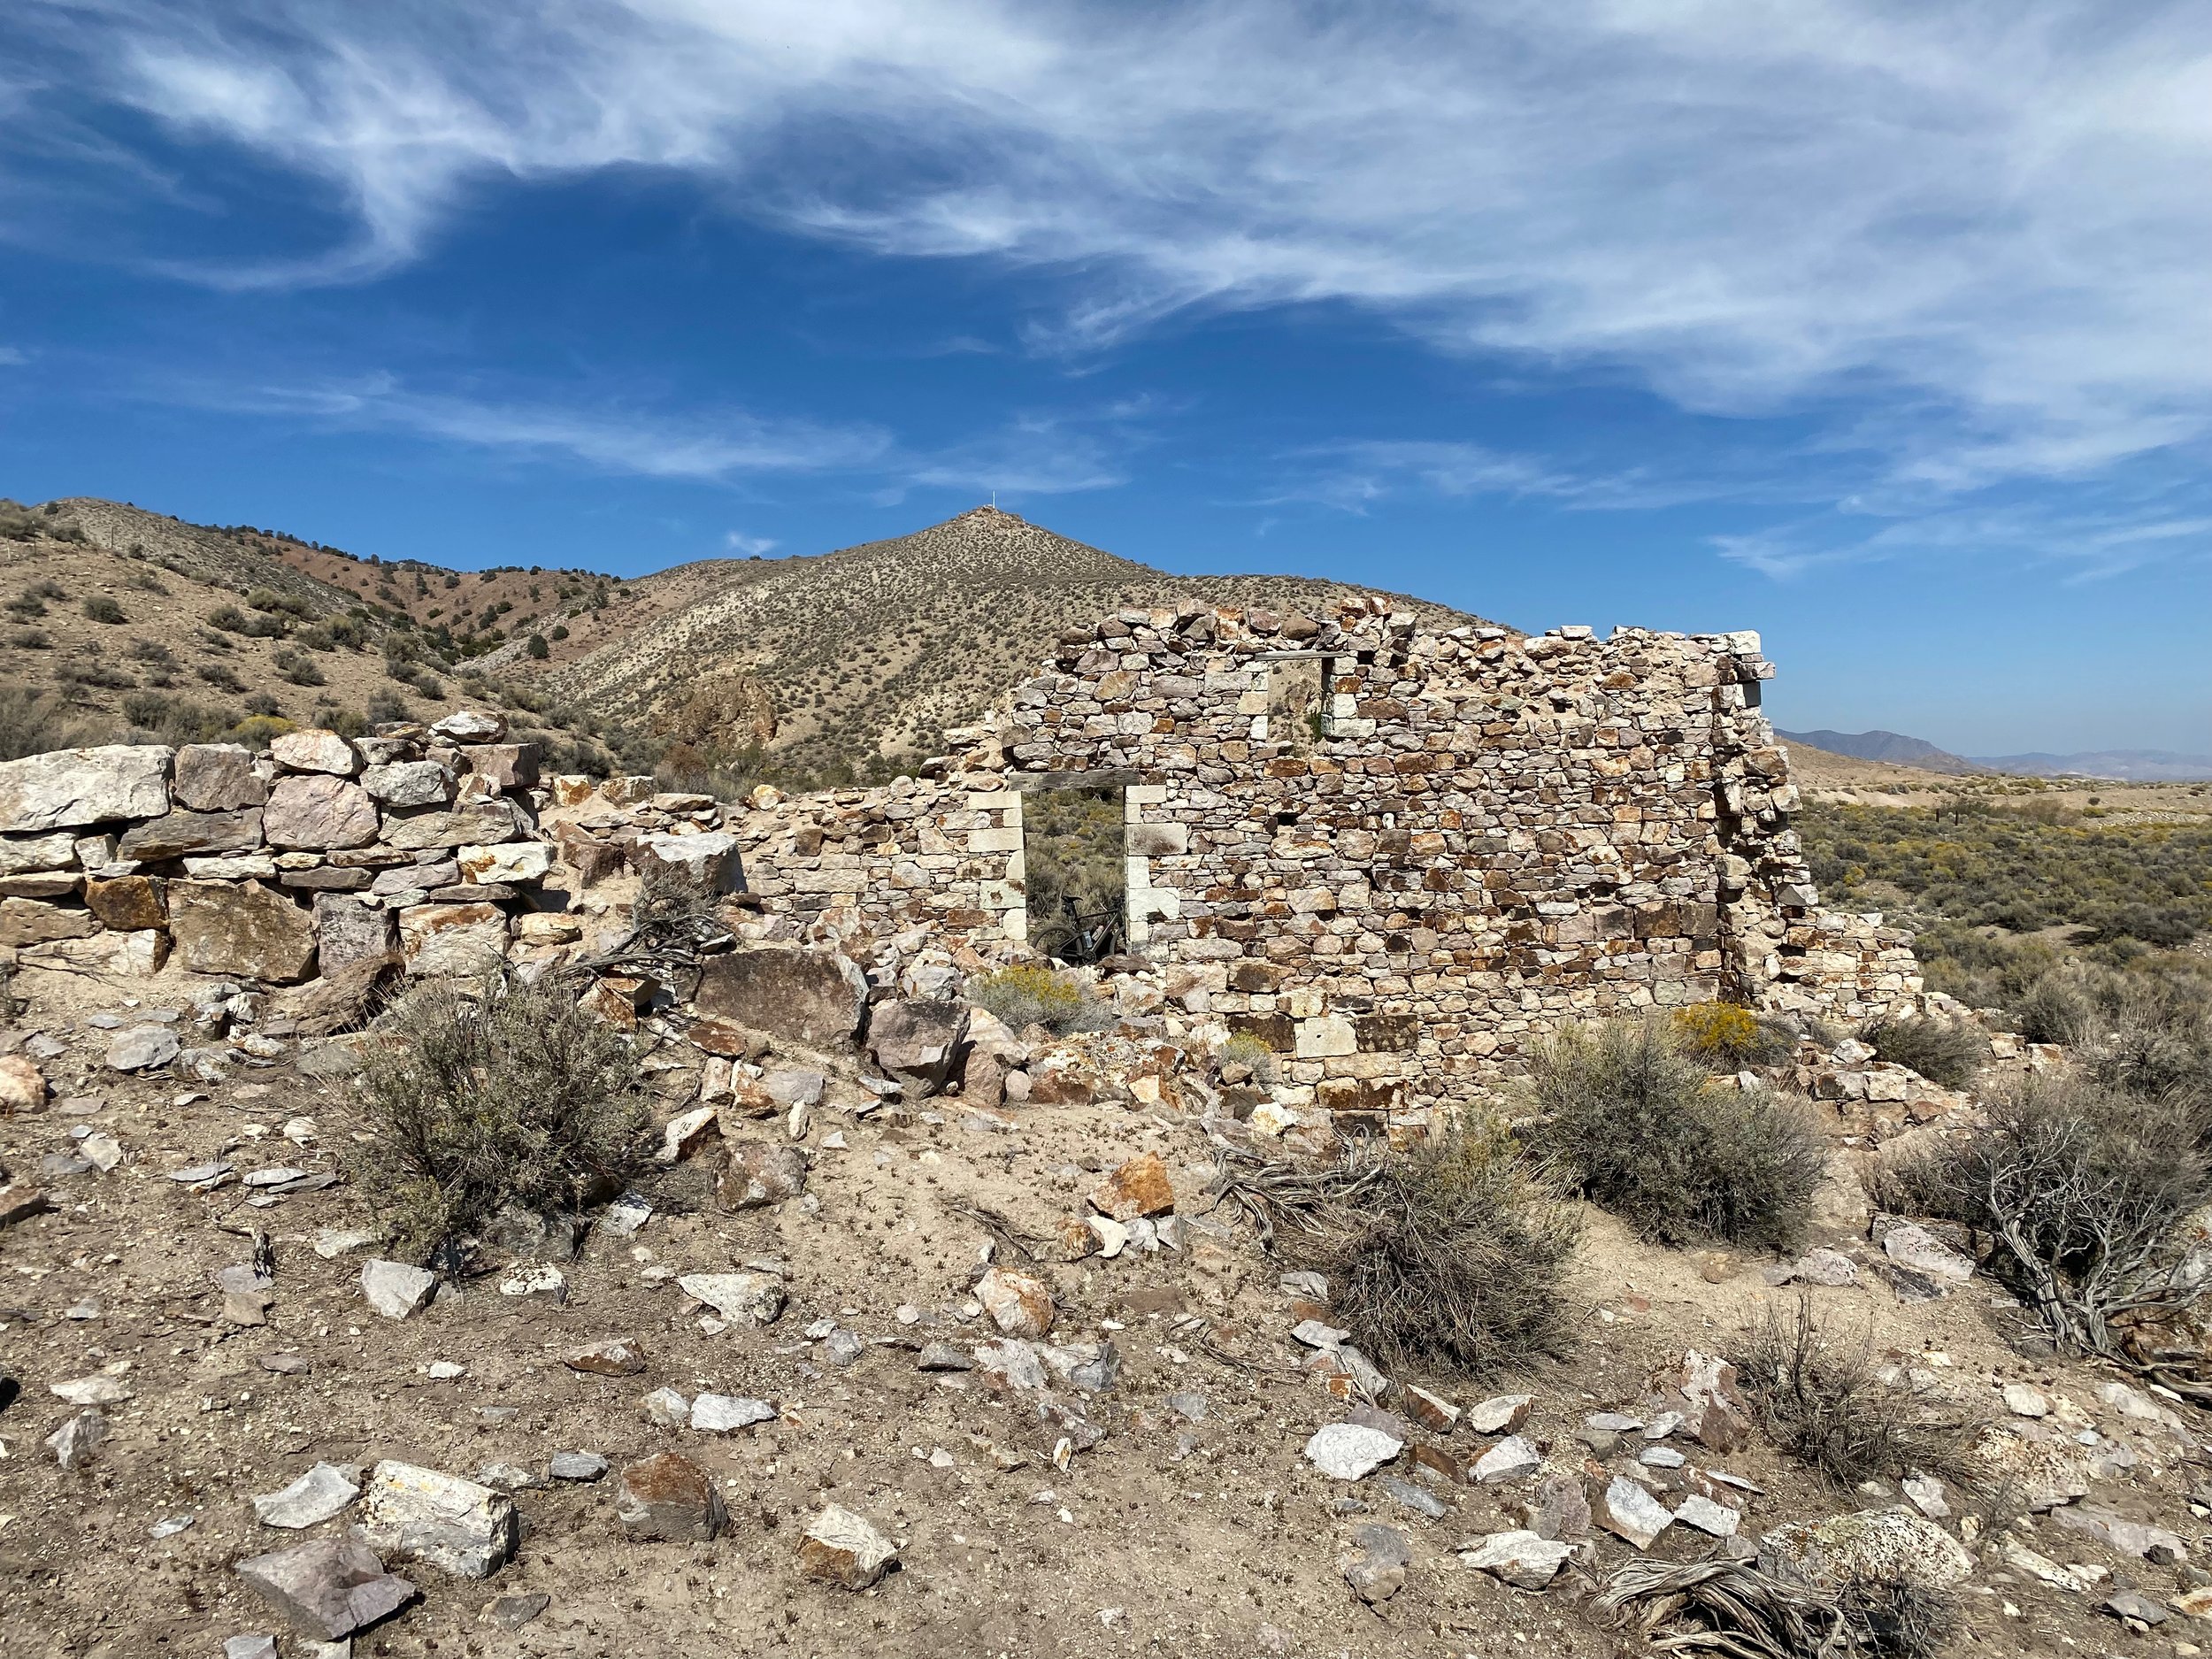  Remains of the Clan Alpine Mining Camp at the base of Cherry Creek Canyon. 